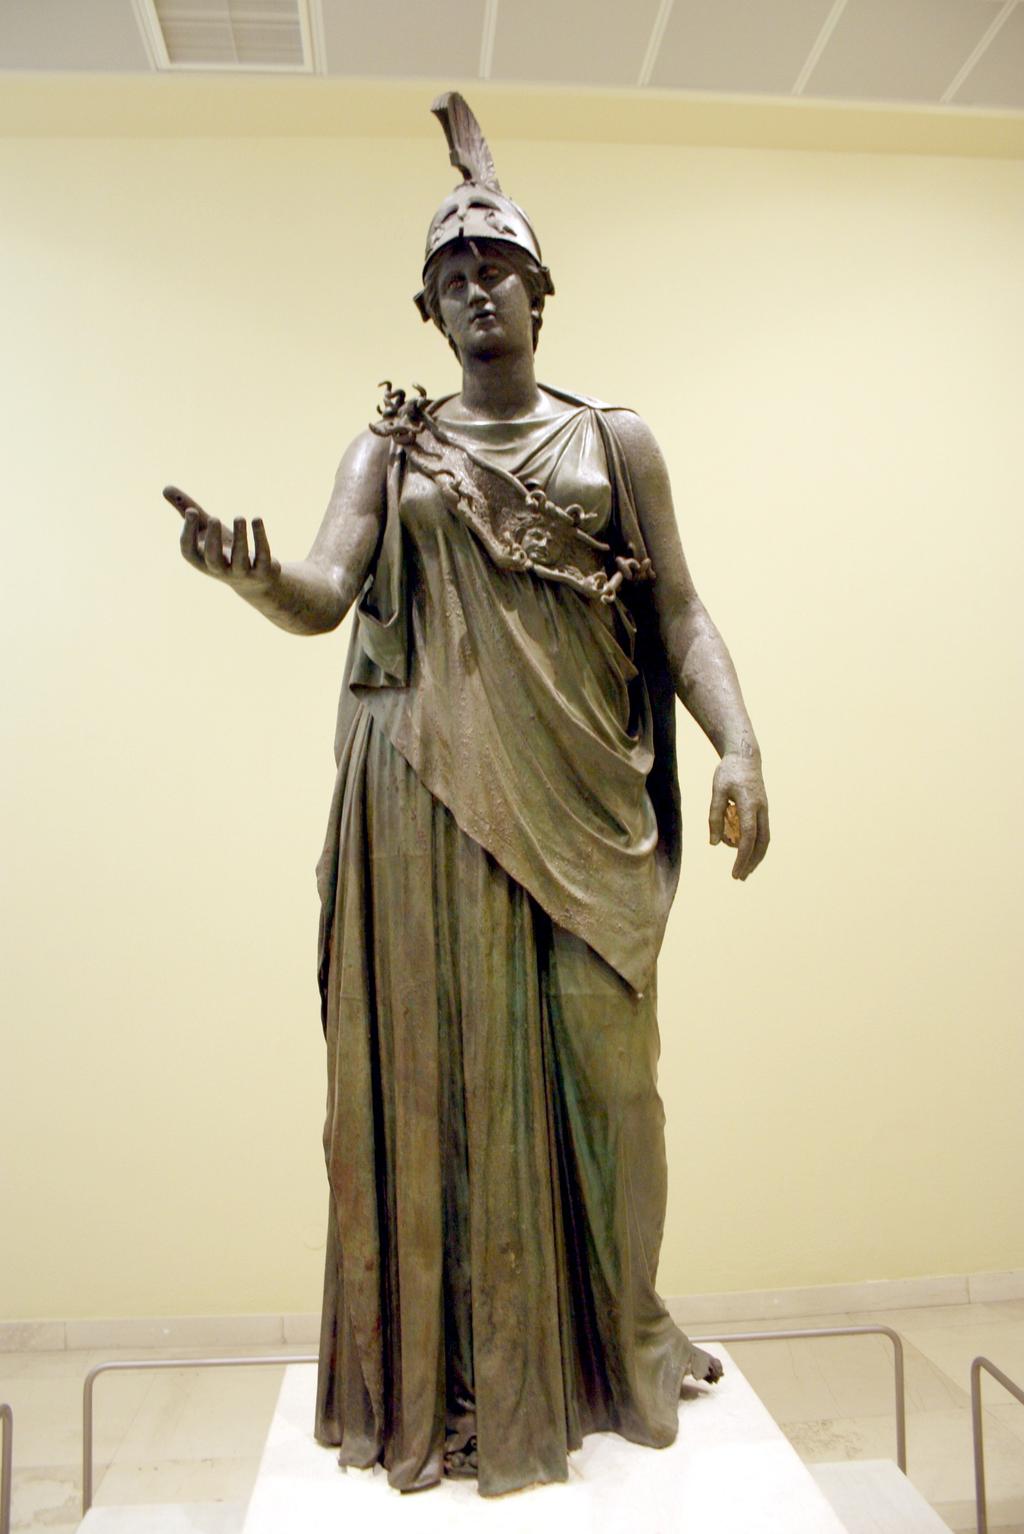 30 It features a peplos open on her right side as well as a band-like aegis. 31 This aegis features a gorgoneon portrayed as medusa just like the Athena Polias Piraeus Athena Image credit: https://en.